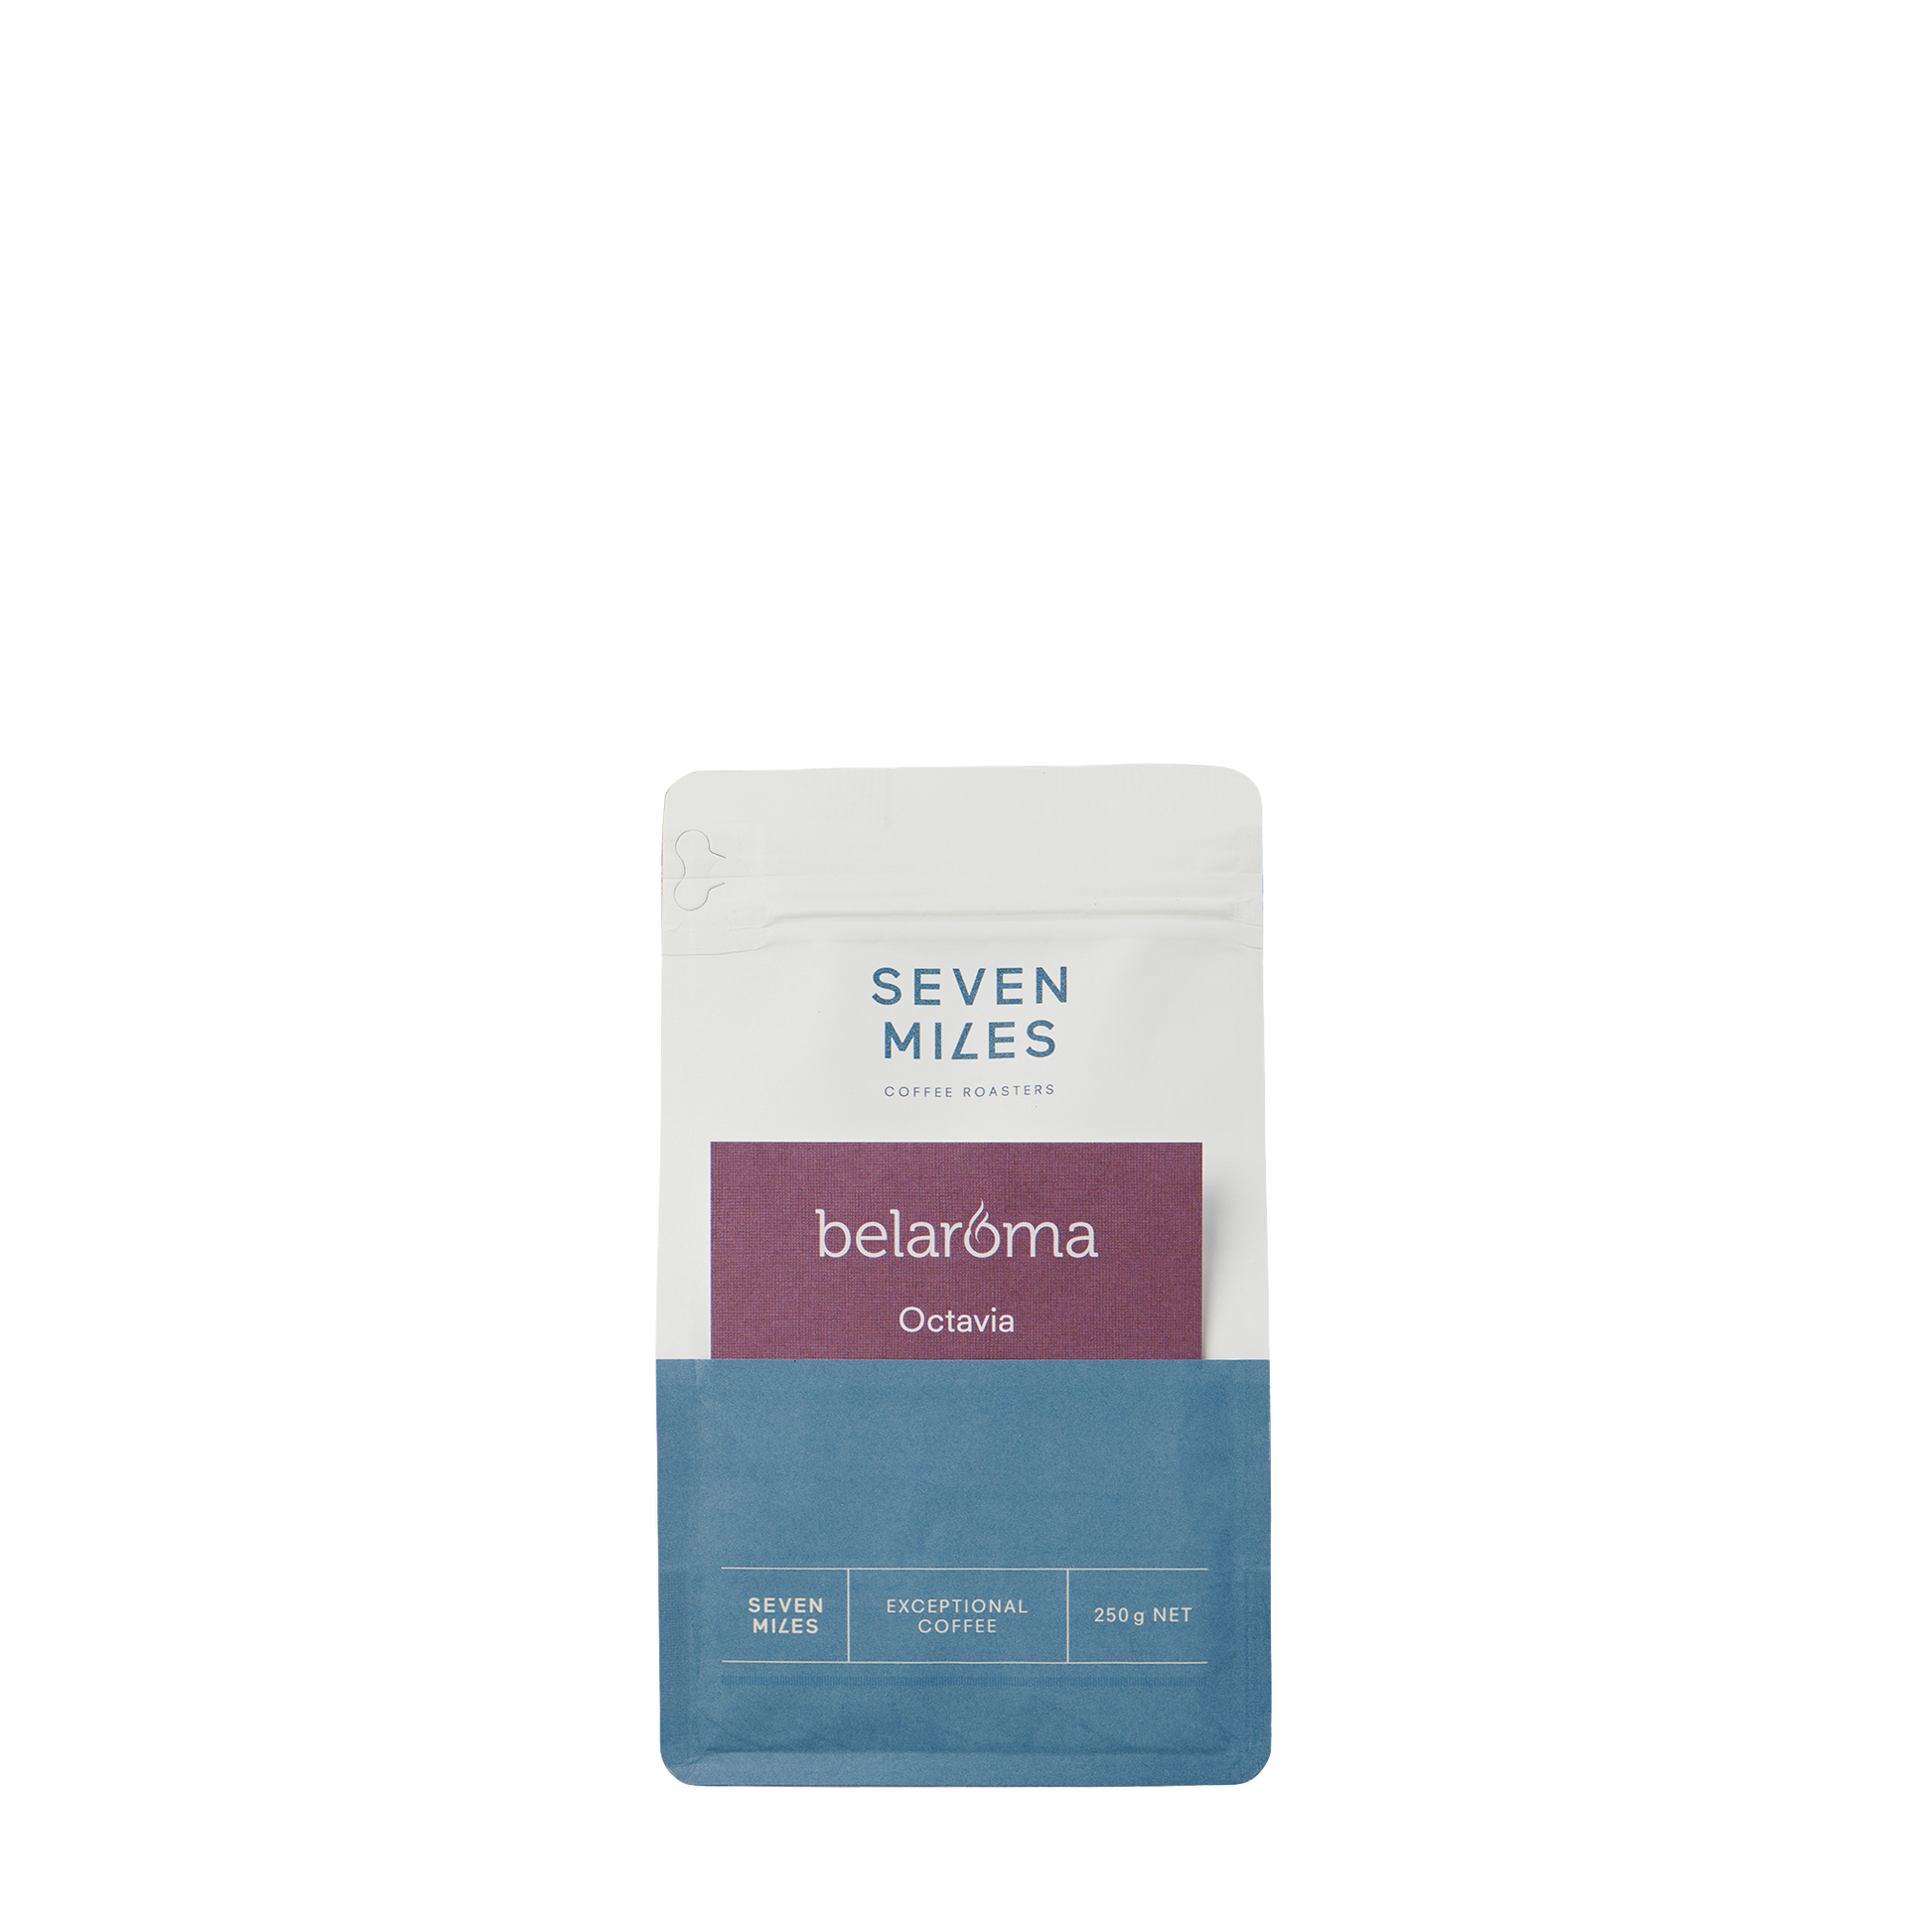 Seven Miles Octavia 250g is a light/medium roast of outstanding complexity and smoothness. It is a blend characterised by milk-chocolate sweetness and clean acidity, combined with notes of creamy malt.